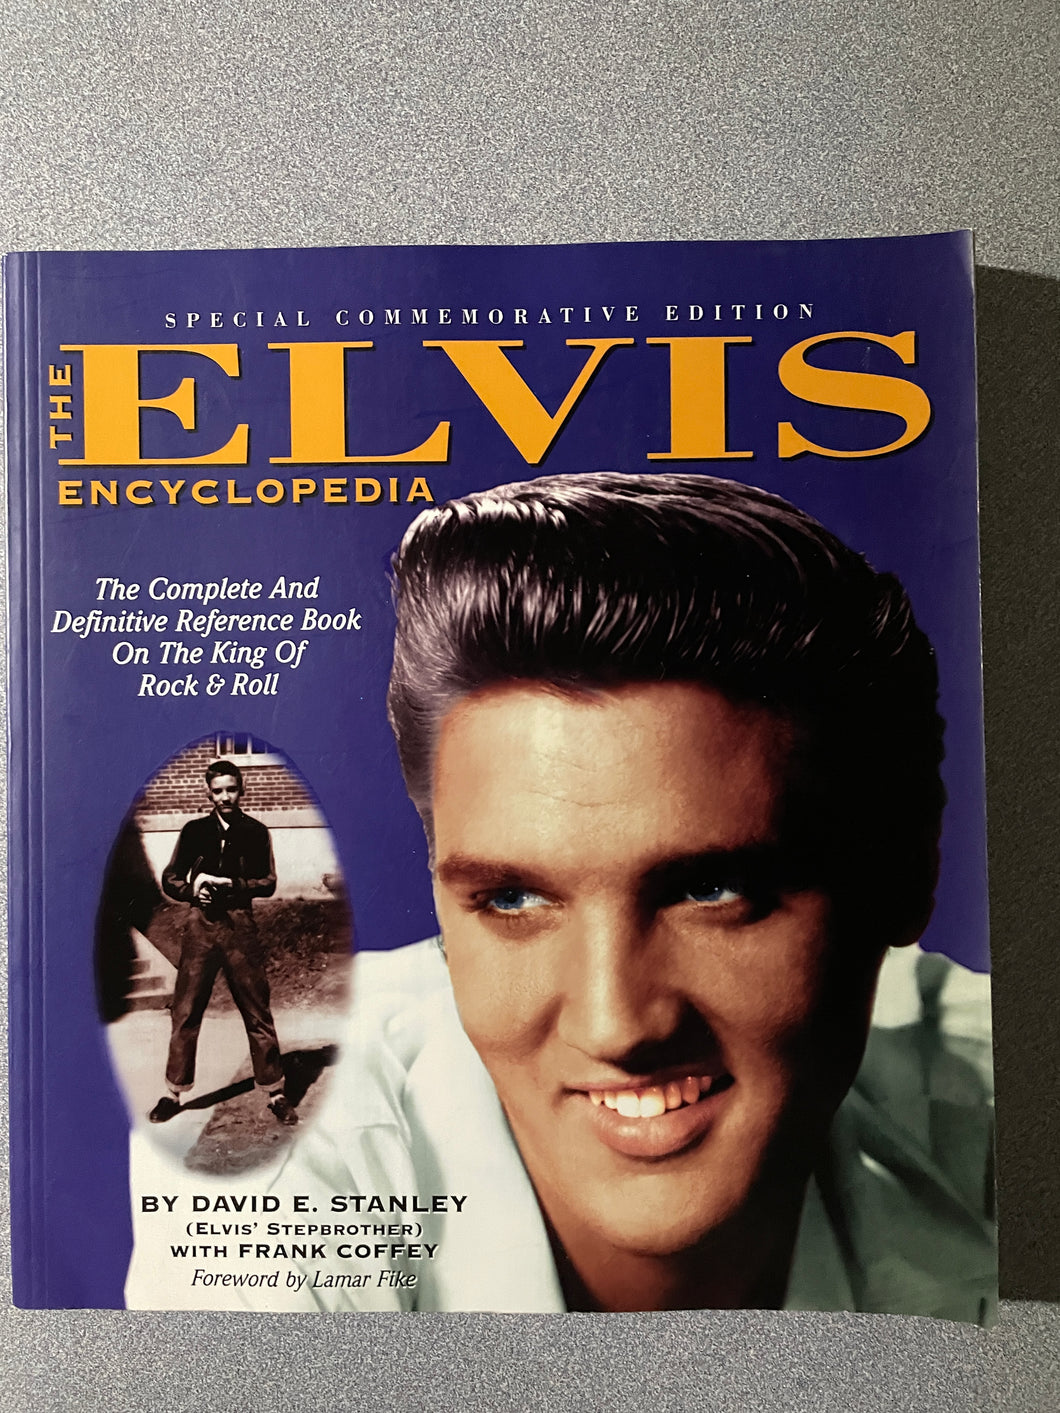 EP  The Elvis Encyclopedia: The Complete and Definitive Reference Book On the King of Rock and Roll, Stanley, David E. [1997] N 12/23